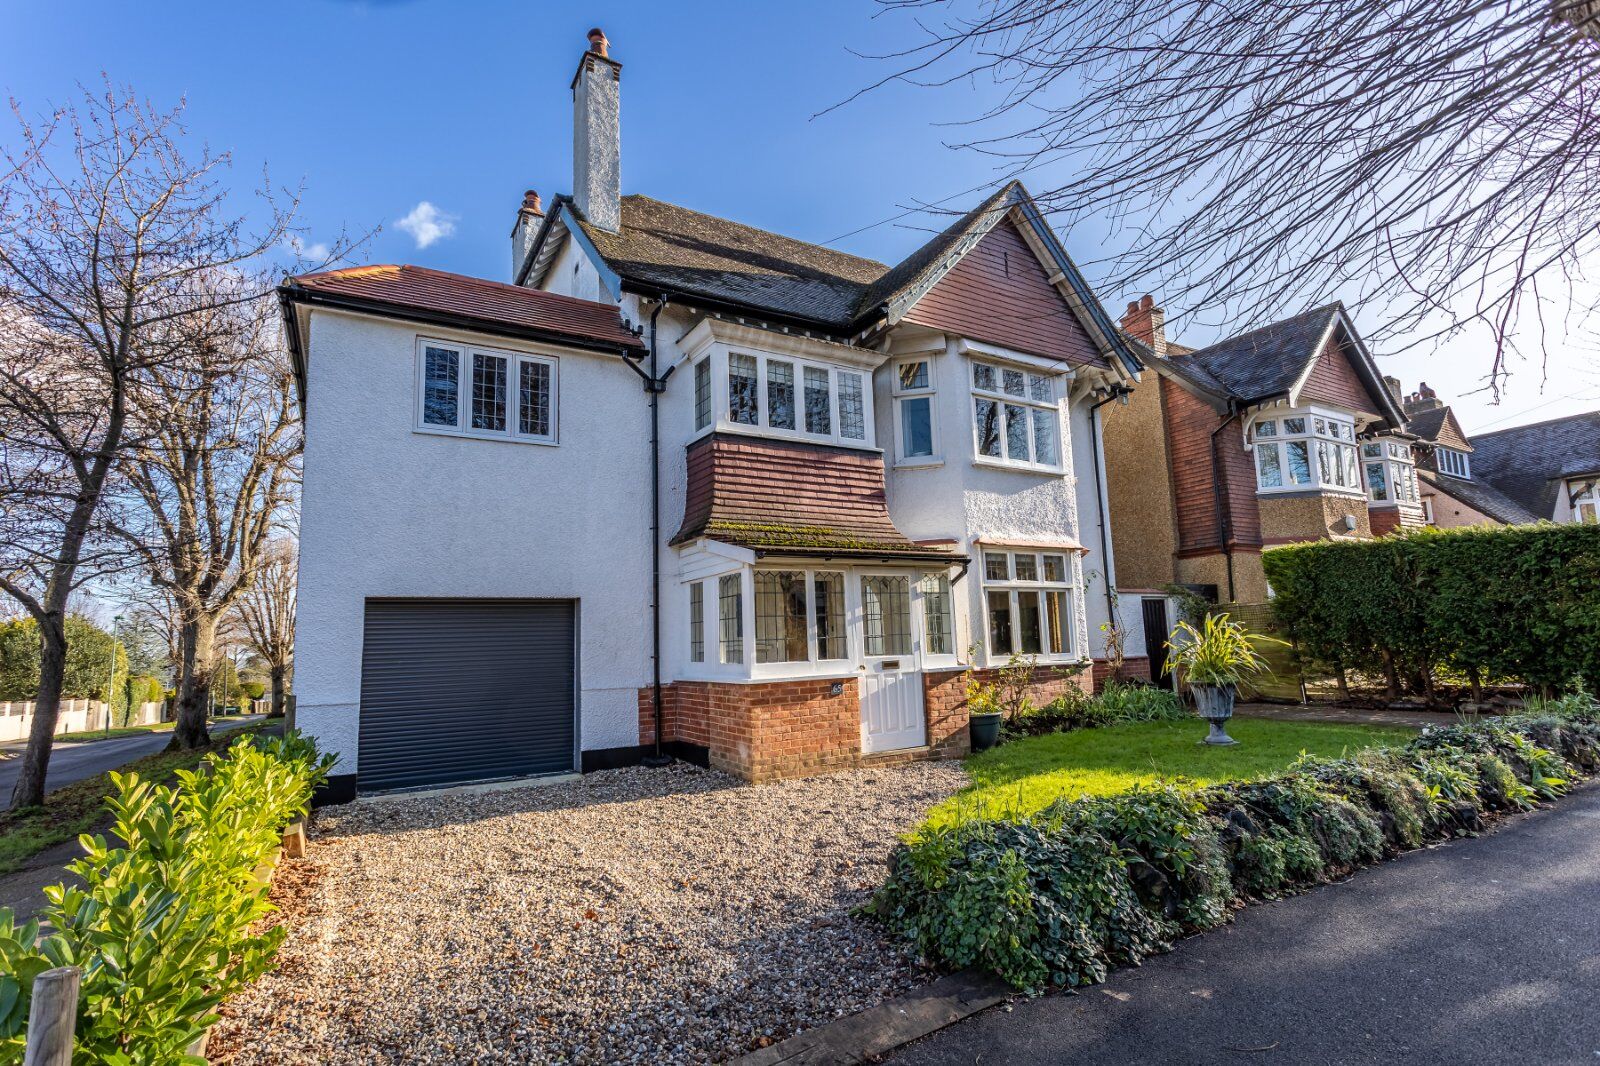 6 bedroom detached house for sale The Ridgway, South Sutton, SM2, main image